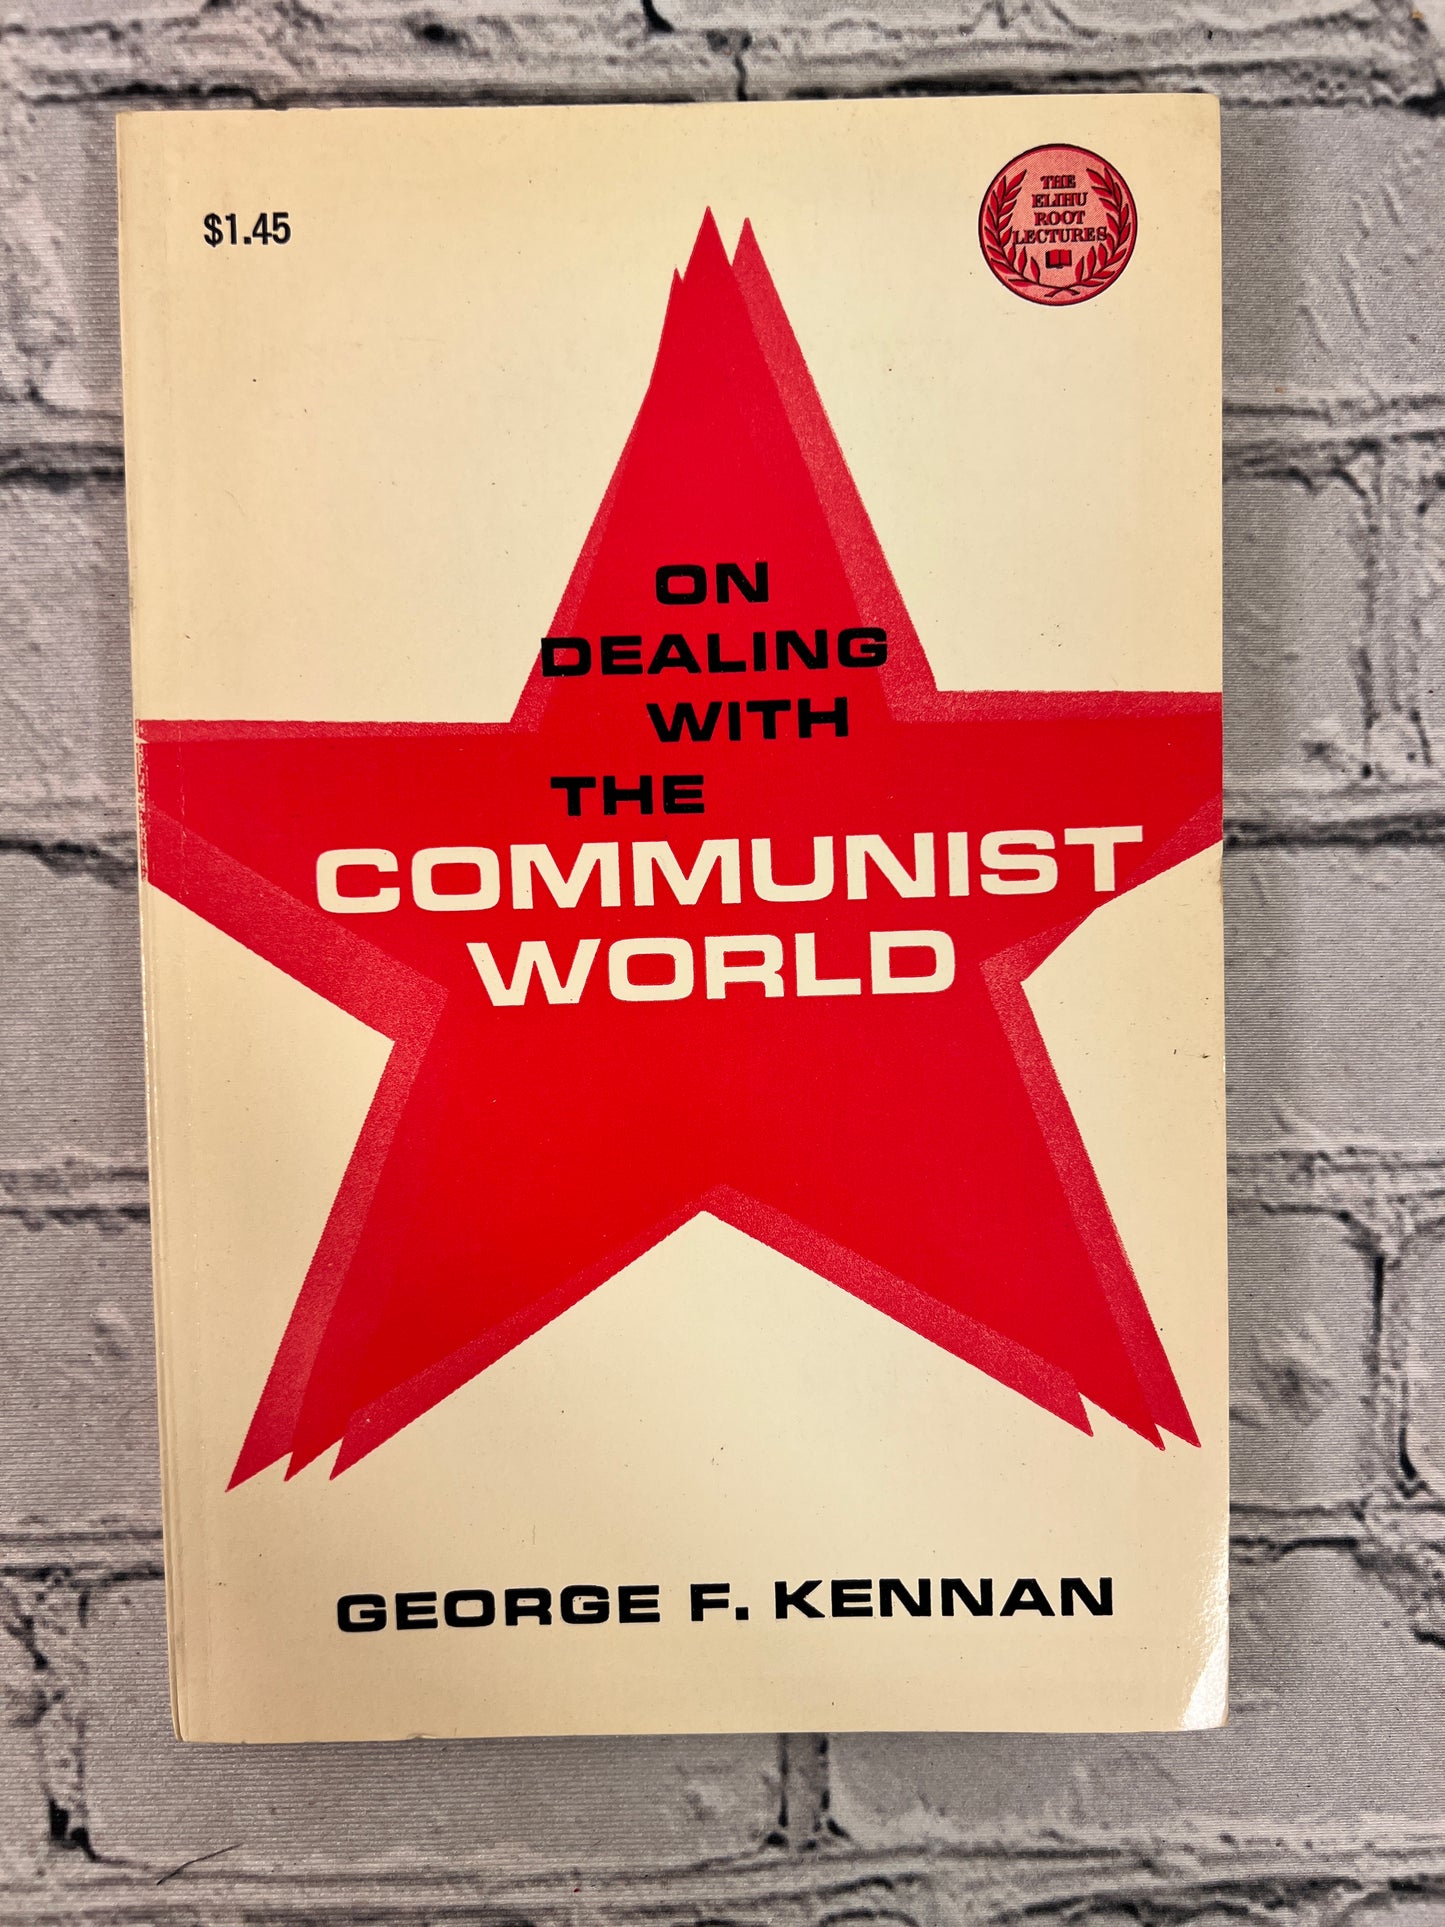 On Dealing with the Communist Worldby George F. Kennan [1st Ed. · 3rd Print · 1965]